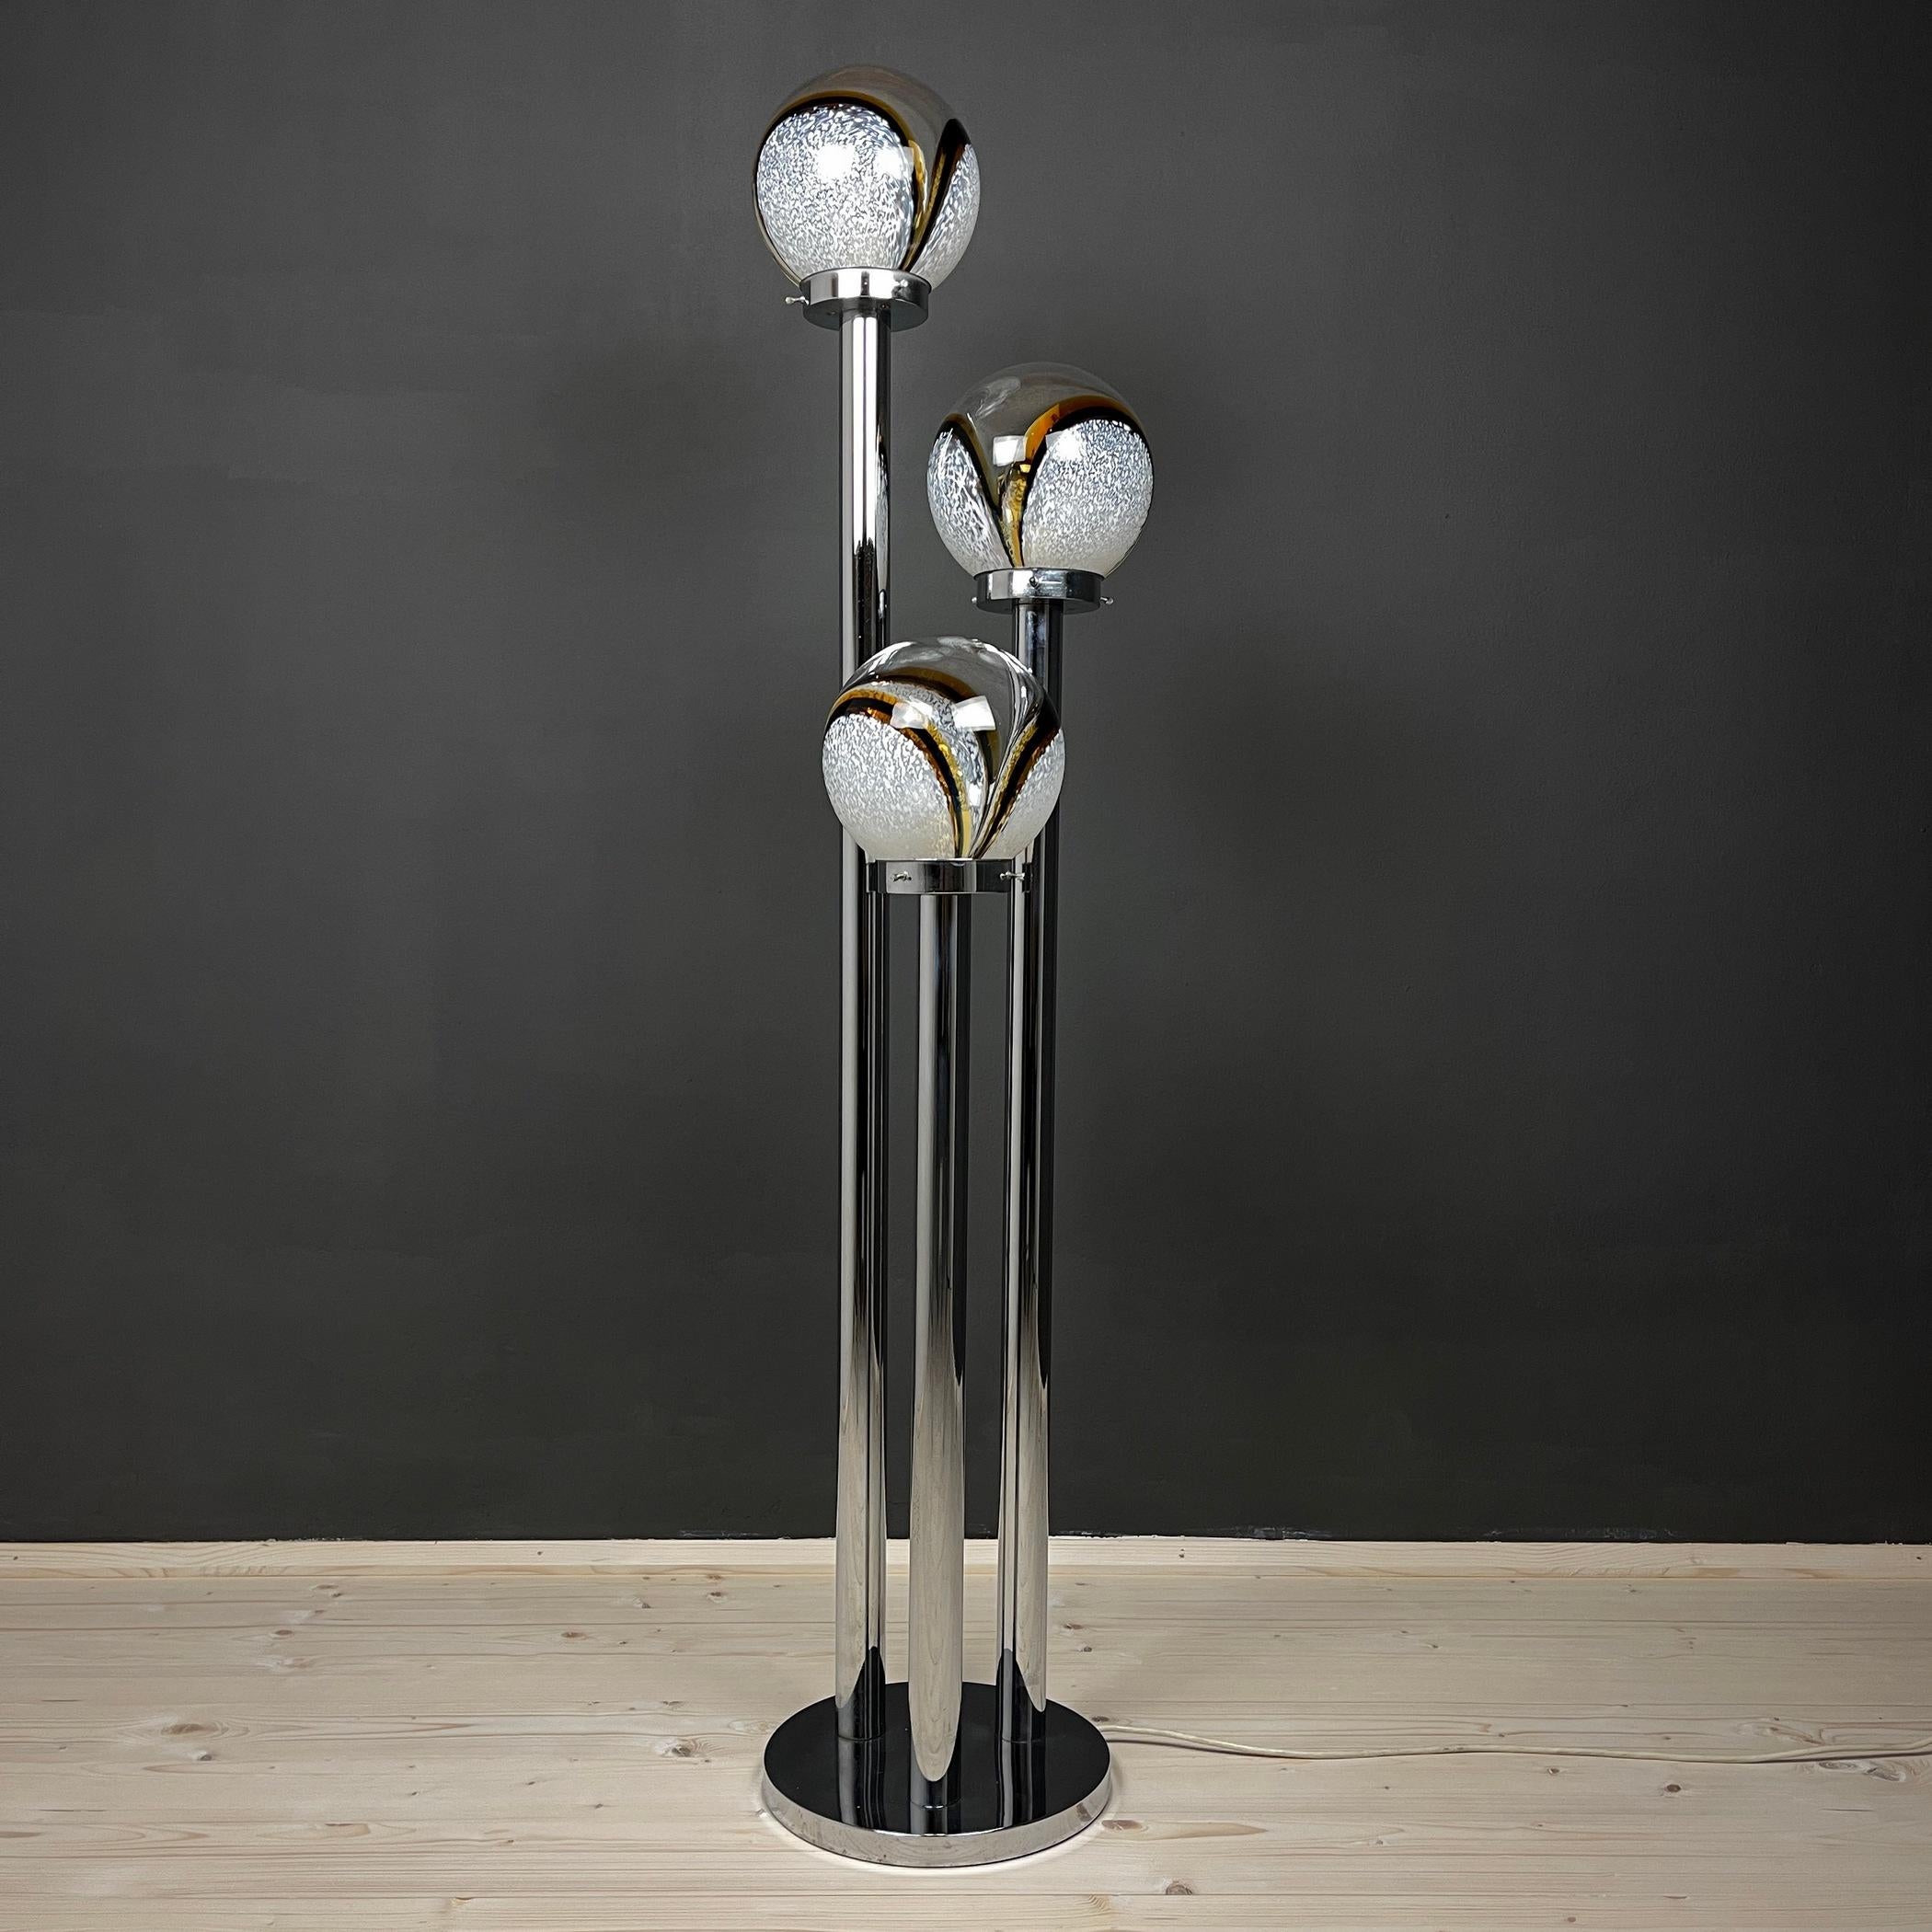 Italian-made in the 1970s midcentury AV Mazzega floor lamp made of Murano glass. In 1946, Angelo Vittorio Mazzega formed AV Mazzega. Over the years, Mazzega has collaborated with other highly regarded designers from around the world, including De